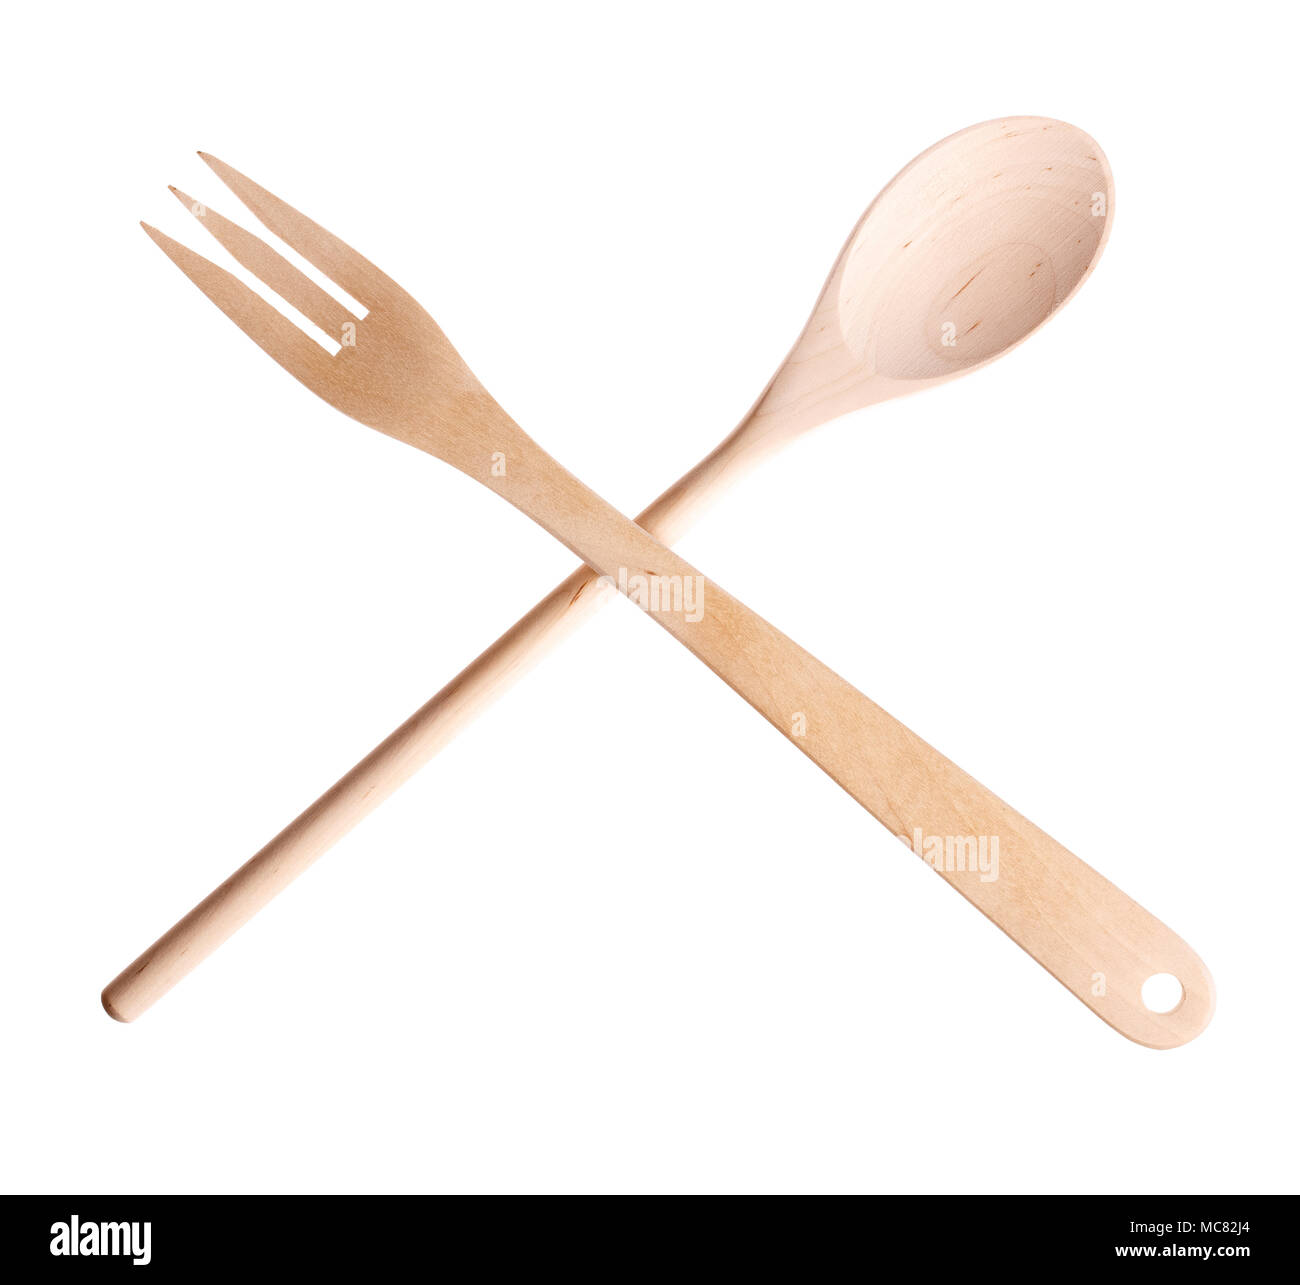 Wooden fork and spoon on a white background. Stock Photo